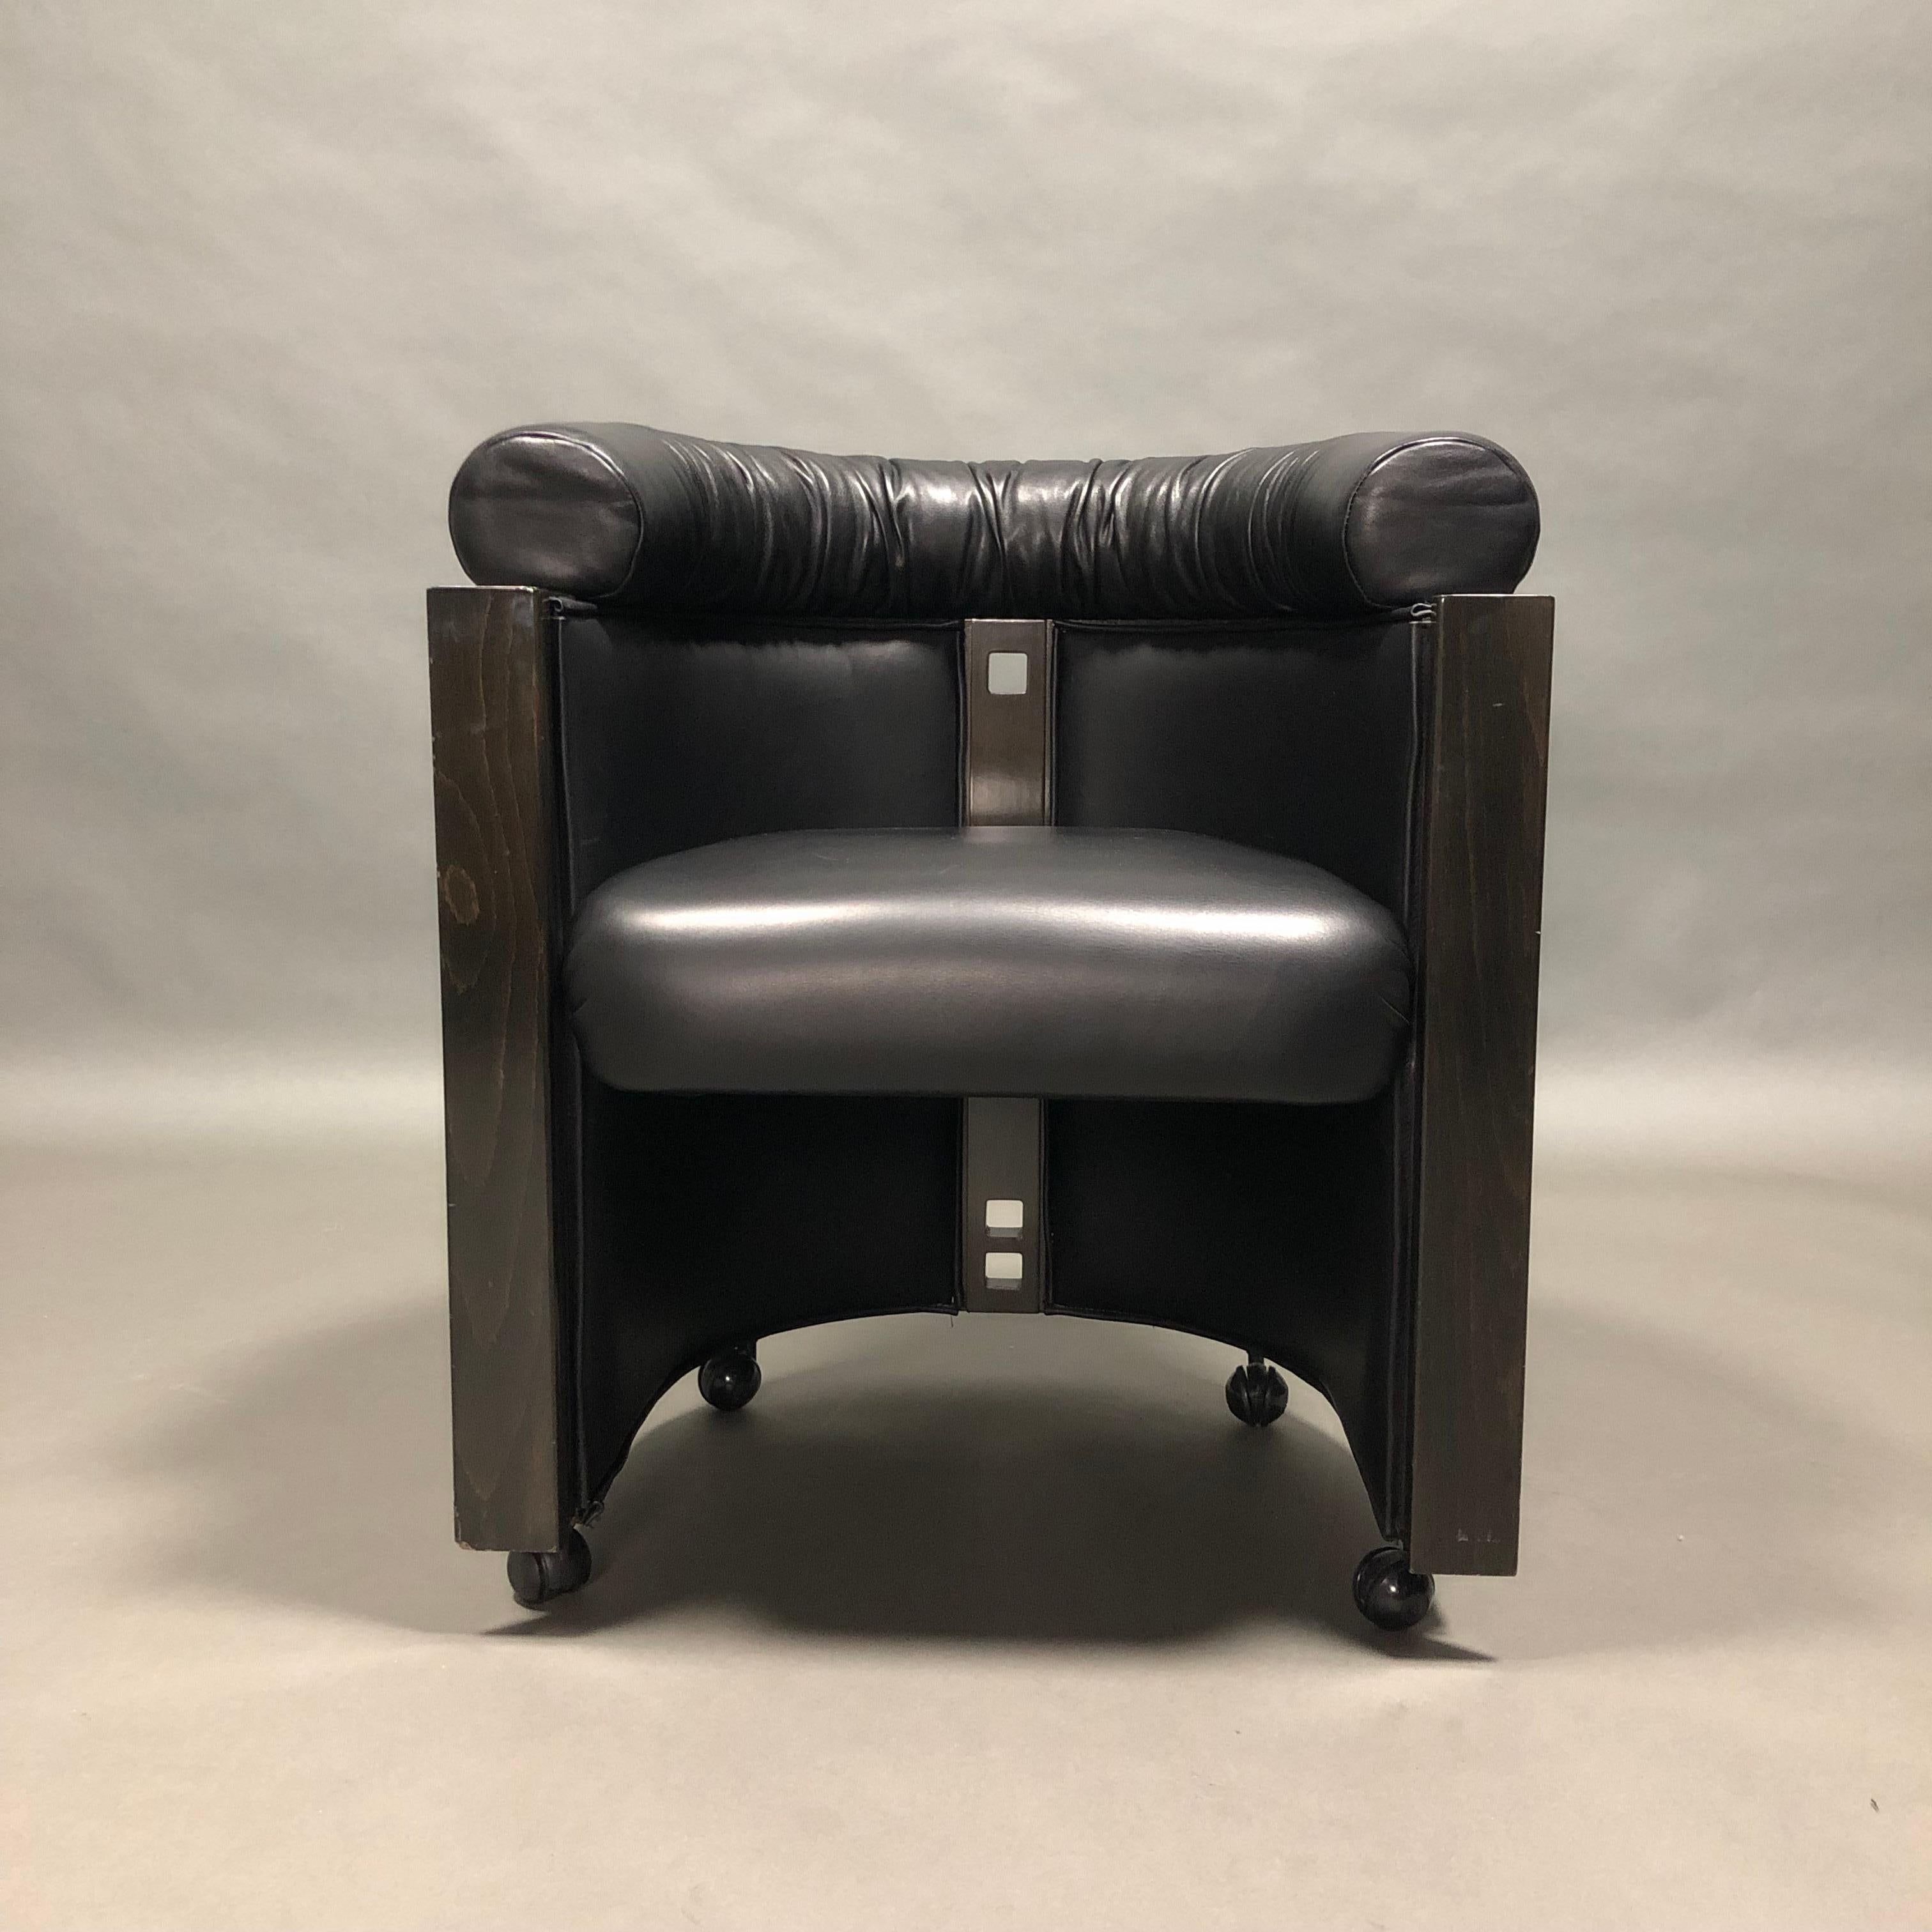 Elegant and very rare club chair by Umberto Asnago for Giorgetti, Italy, 1980s.

The chair is made of black leather and ebonized Oak. The back of the chair is also covered in leather. The base has four wheels.

Designer: Umberto